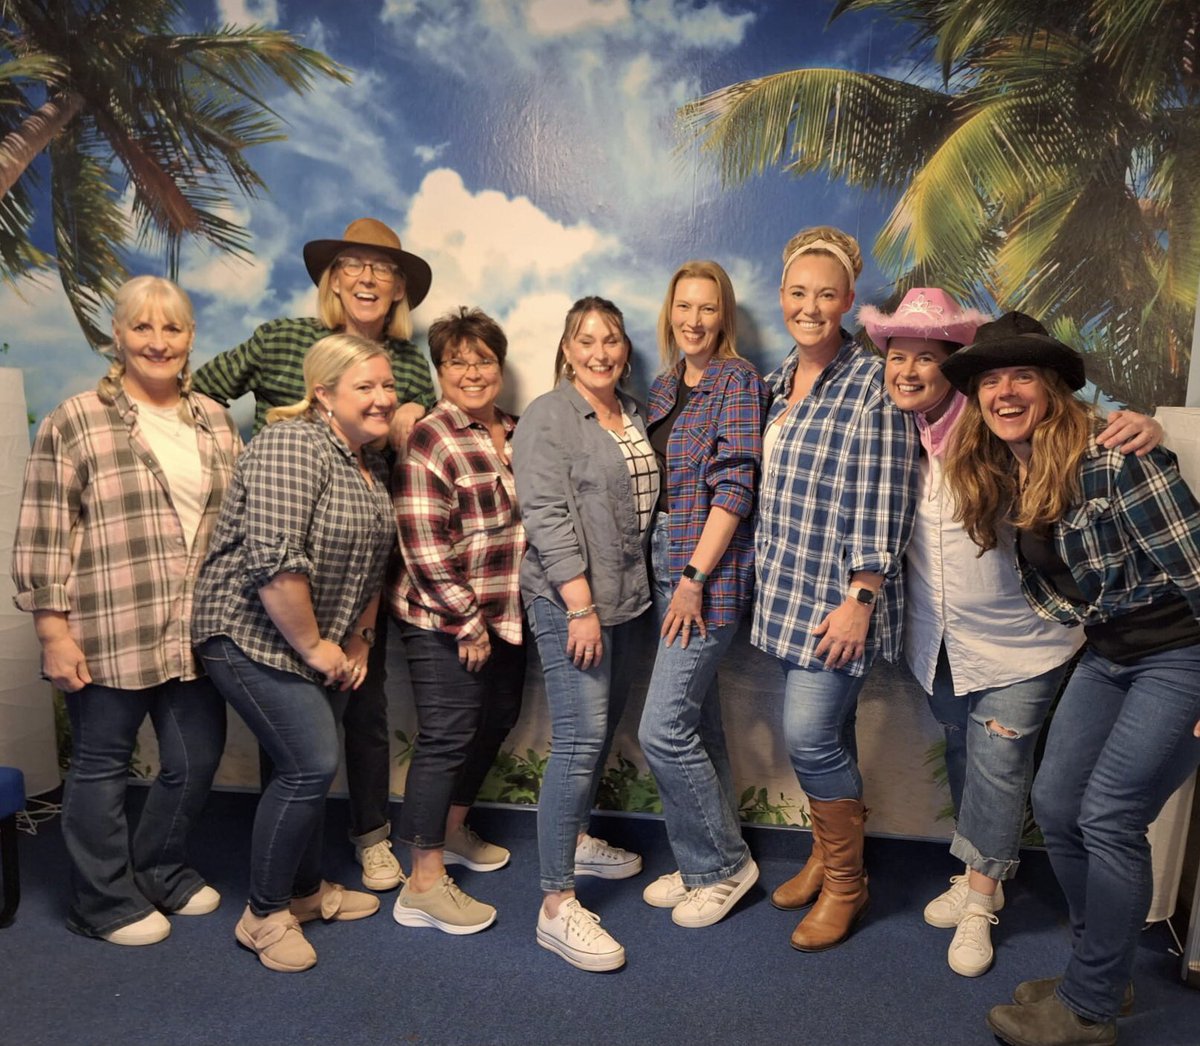 Some of our fantastic lower school team at this evening’s PTA barn dance…with the very famous Gavin & Stacey barn dance band! Thanks to them and our fantastic PTA